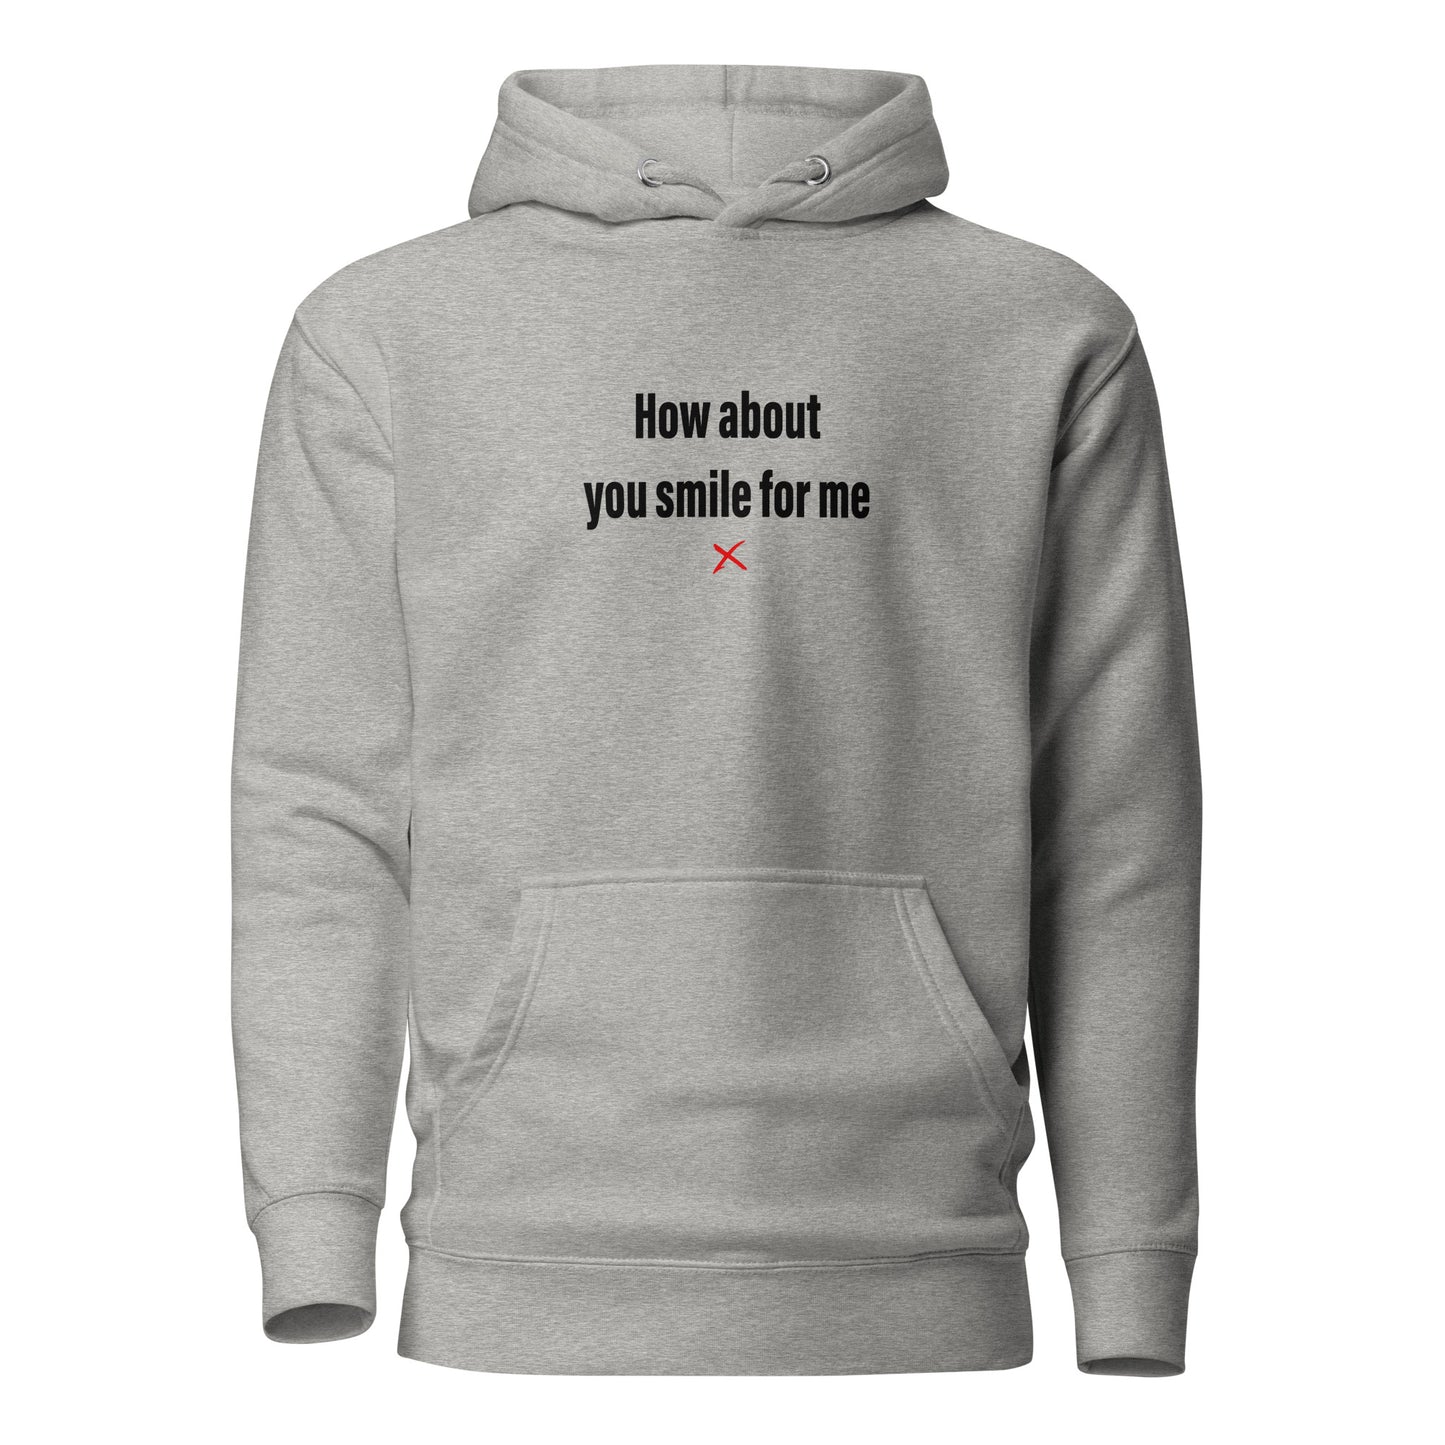 How about you smile for me - Hoodie